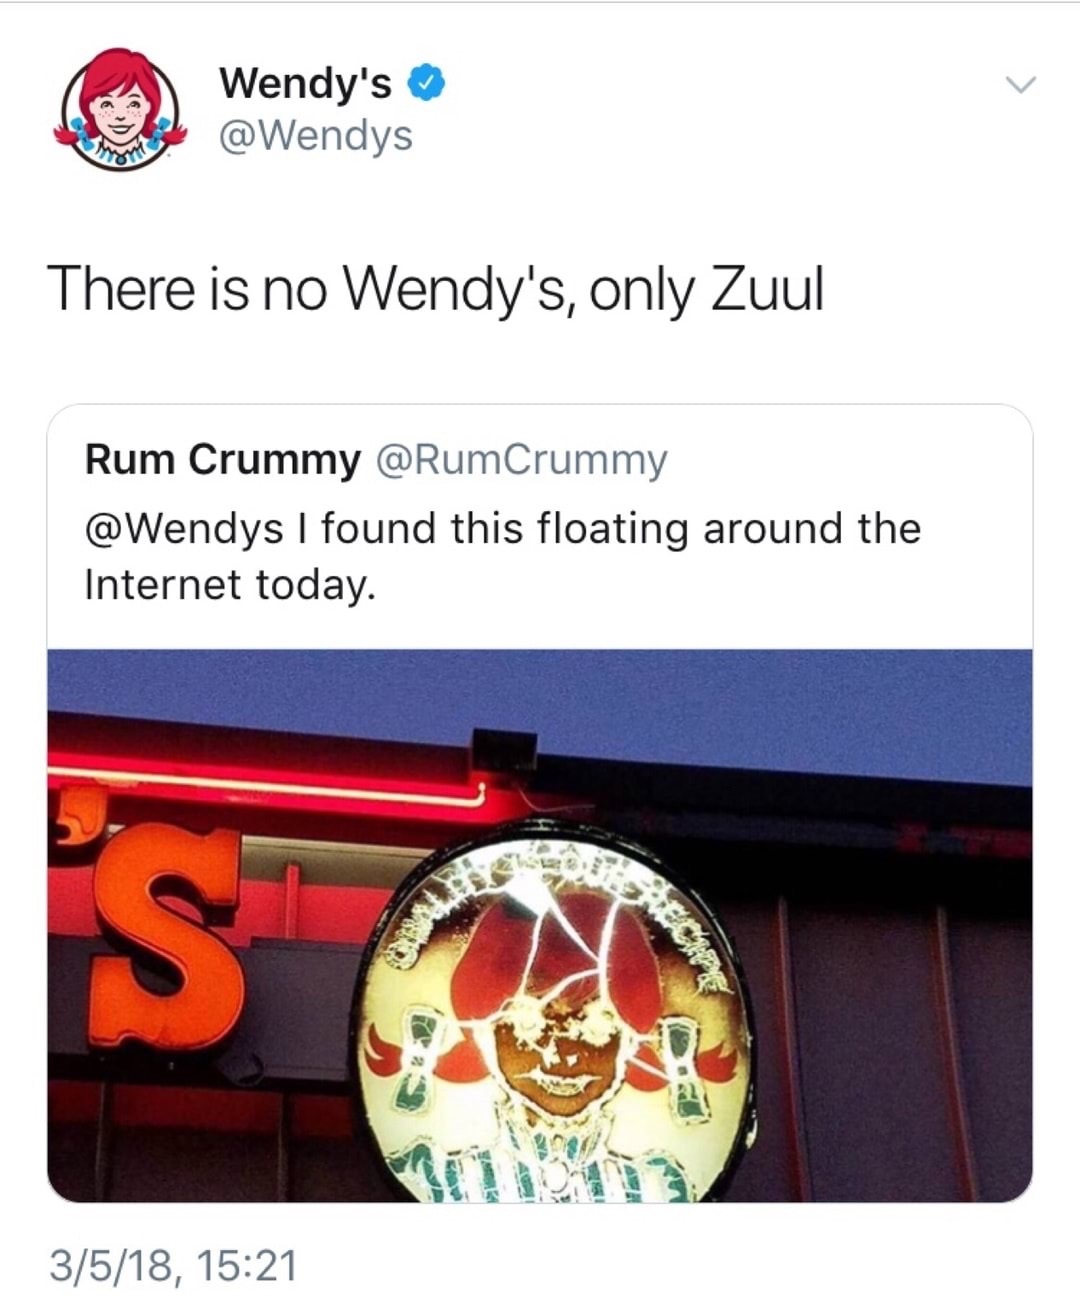 wendys logo devil - Wendy's There is no Wendy's, only Zuul Rum Crummy I found this floating around the Internet today. 3518,